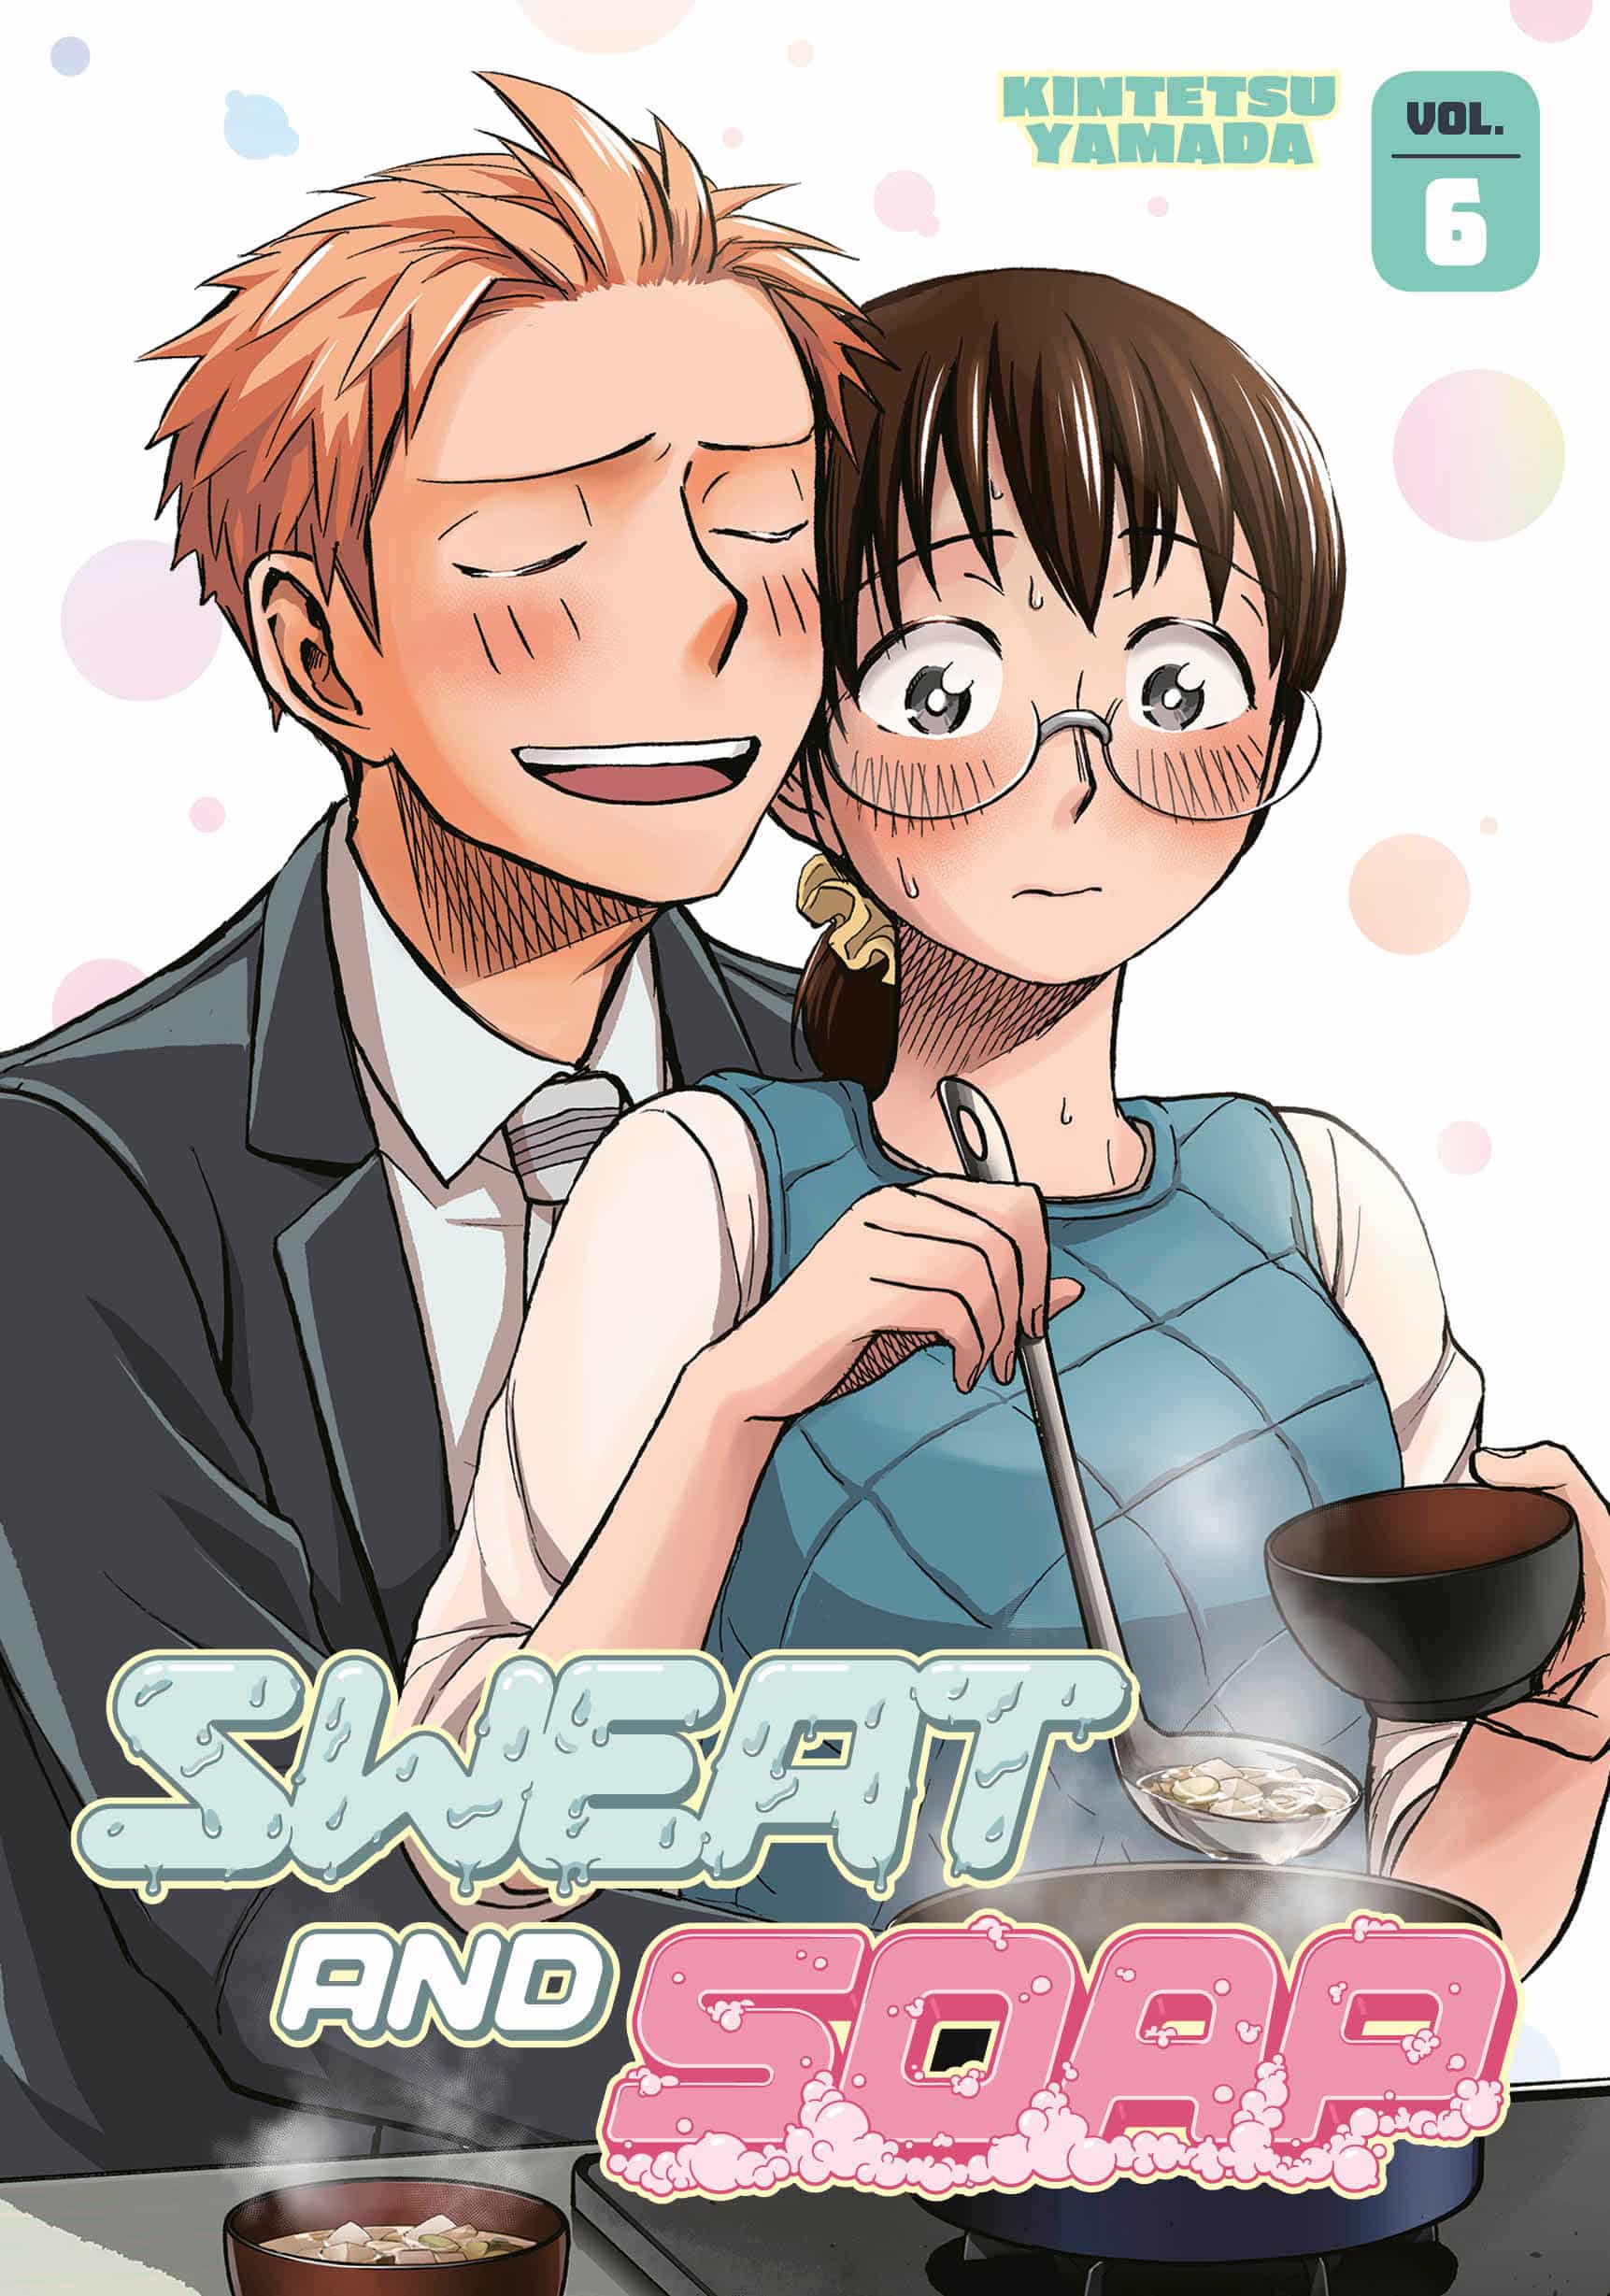 Sweat and Soap - Volume 6